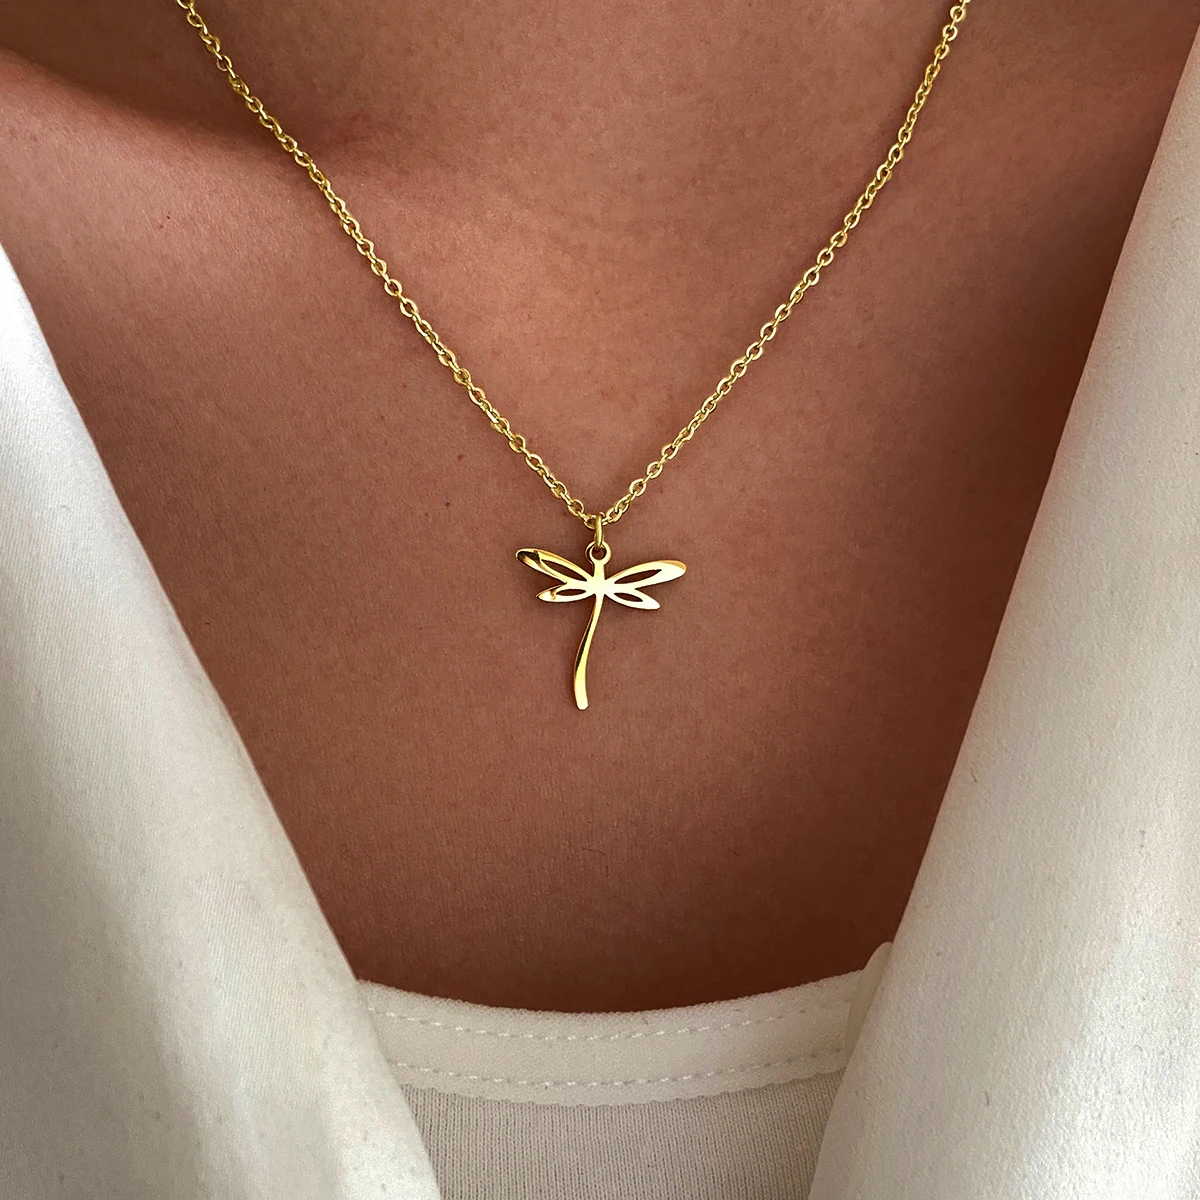 Stainless Steel Necklaces Dragonfly Pendants Chain Choker Jewellery Fashion Necklace For Women Jewelry Wedding Party Friends